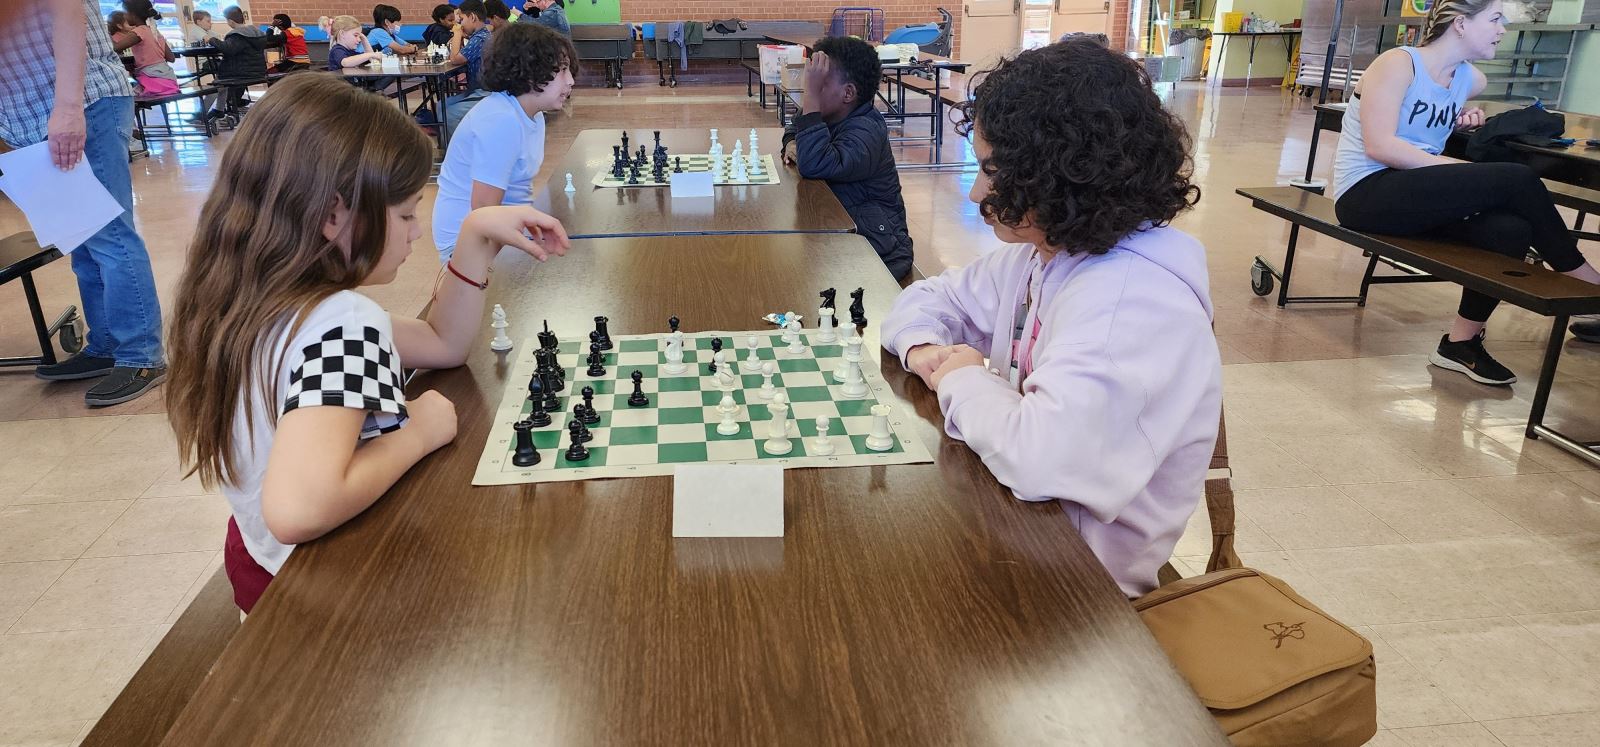 Two girls play chess